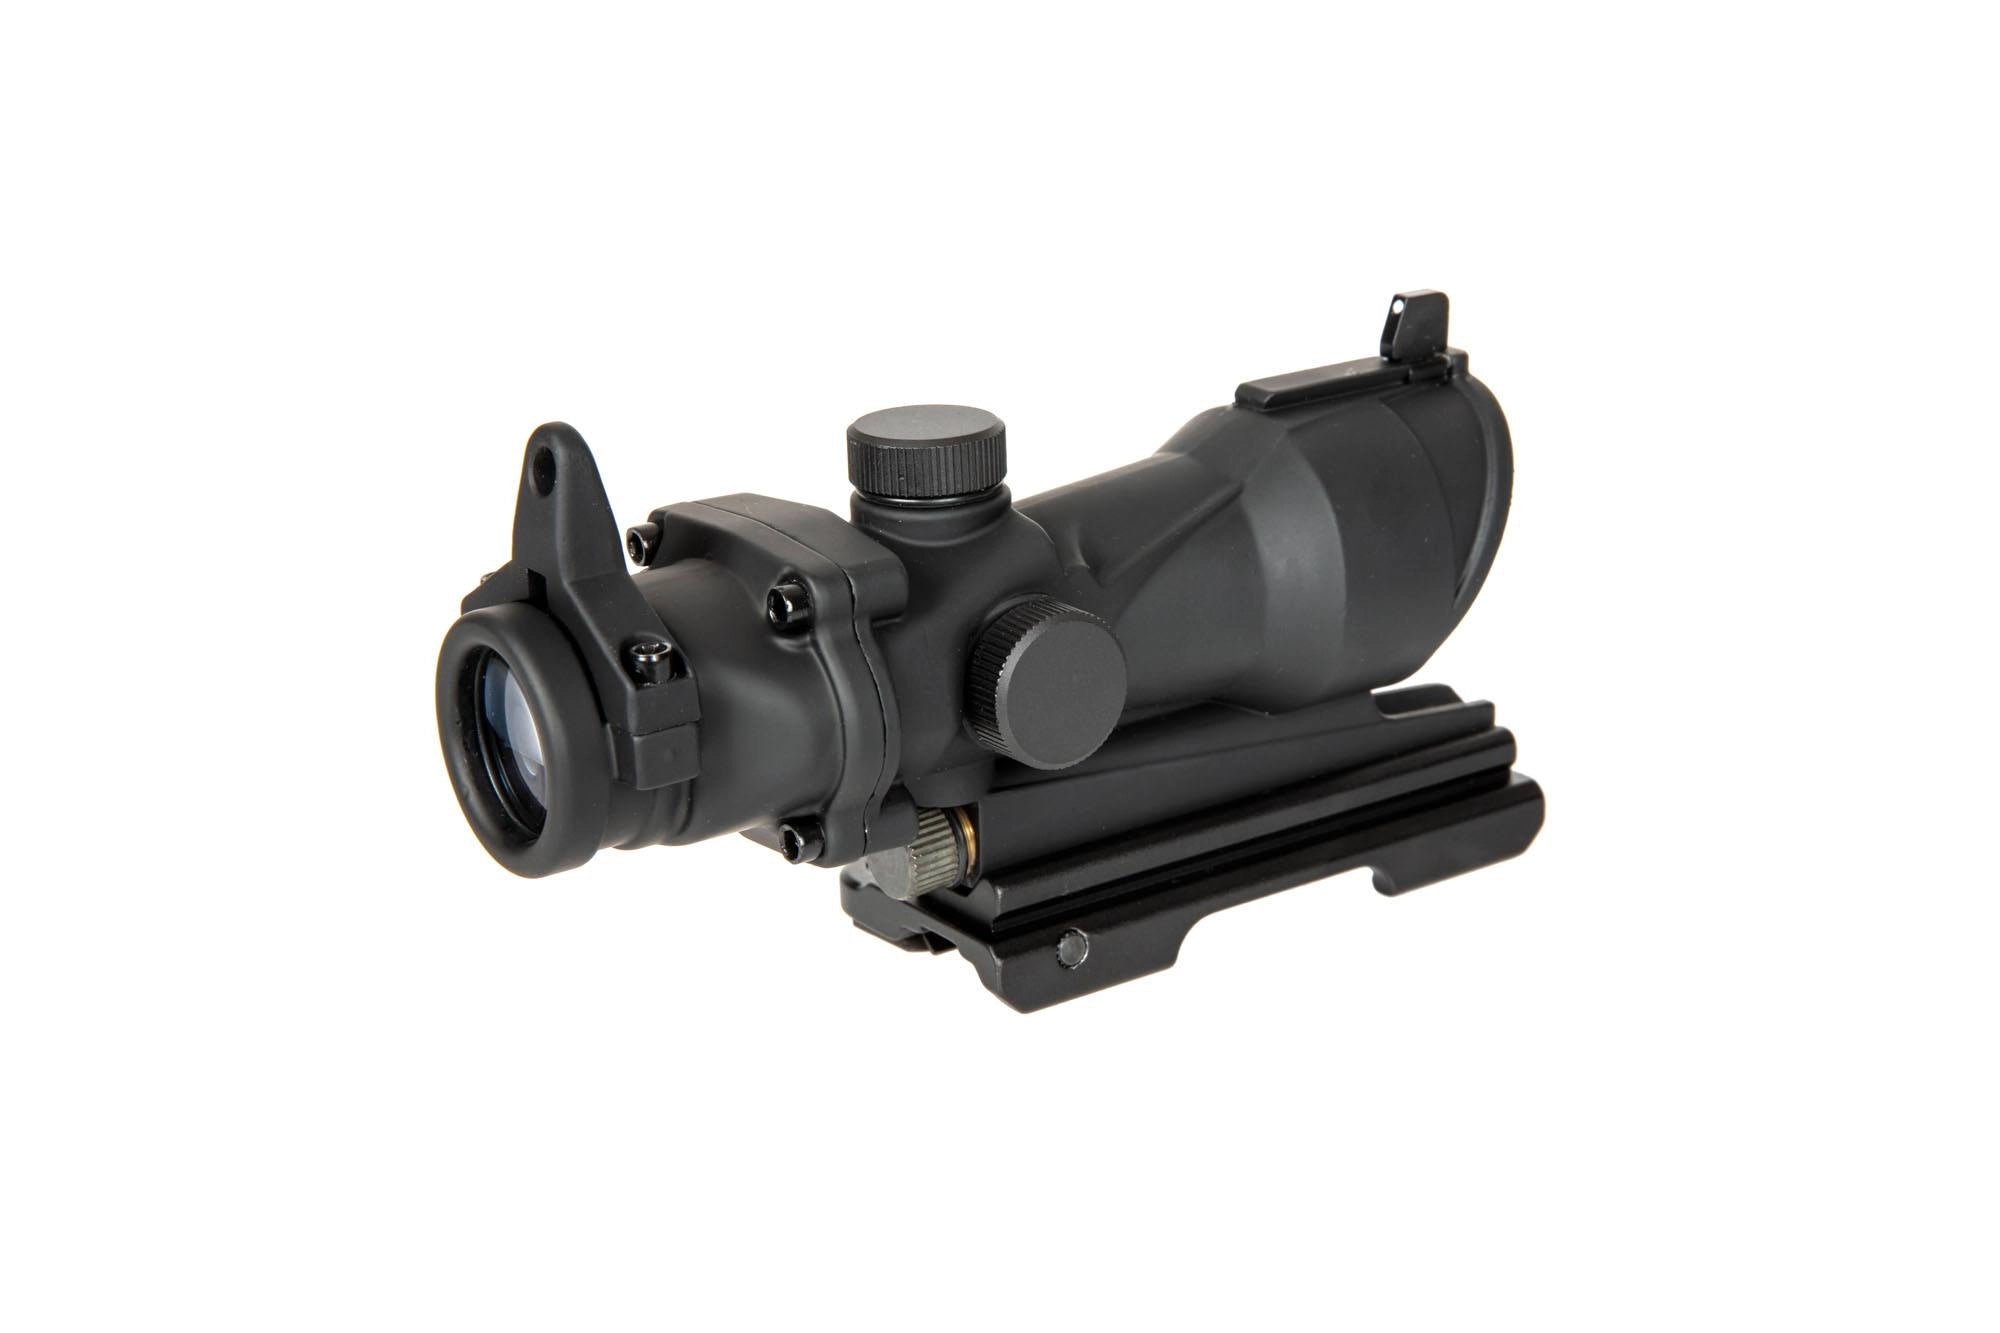 ACOG Style 4x32 Scope Replica with Lighting and QD Mount - Black-1